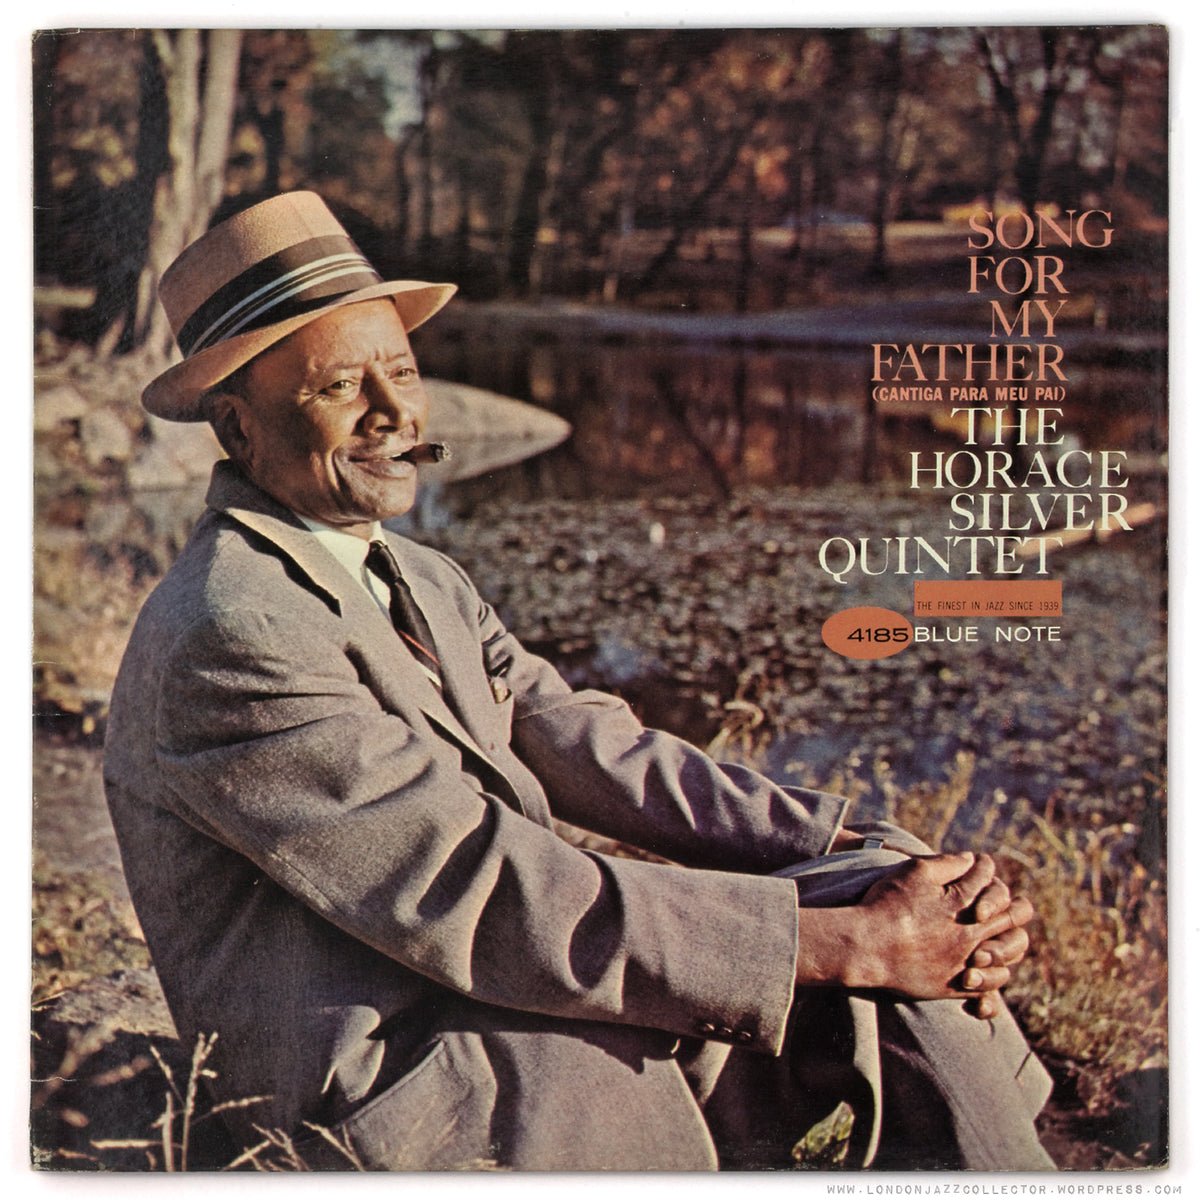 Horace Silver - Song For My Father LP (Blue Note Classic Vinyl Series, 180g, Audiophile)